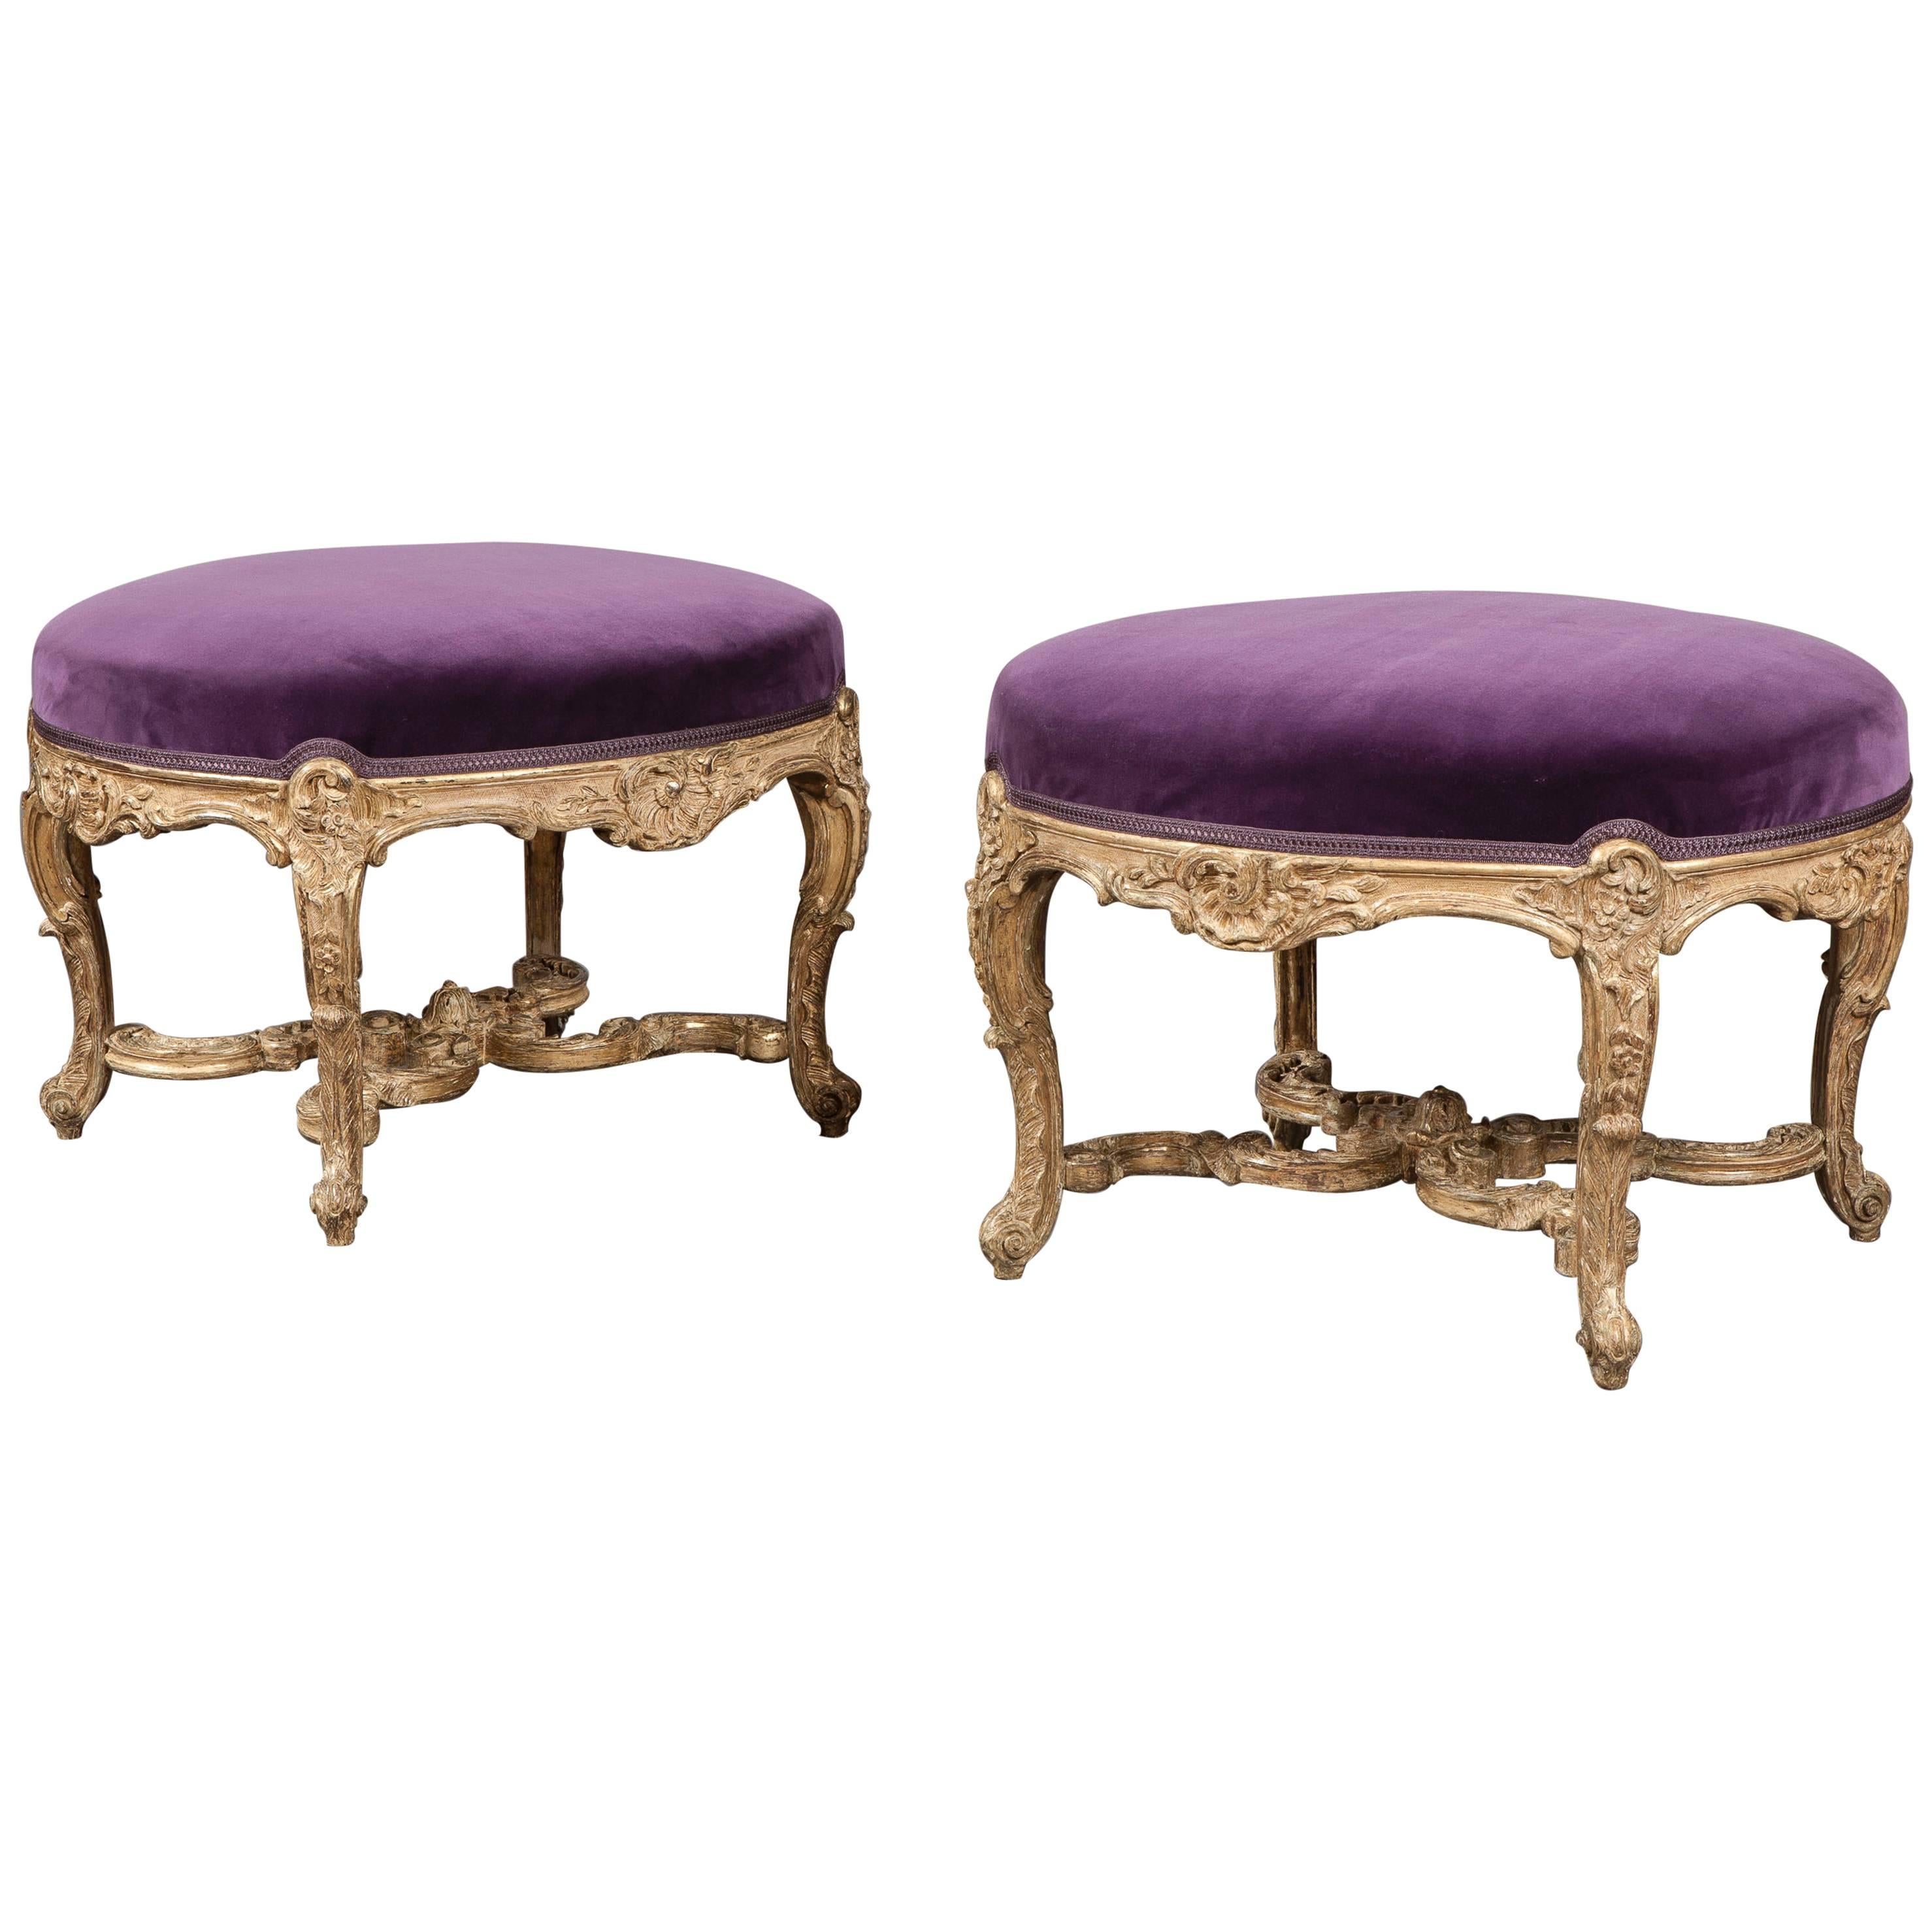 Pair of 19th Century French Giltwood and Purple Velvet Footstools